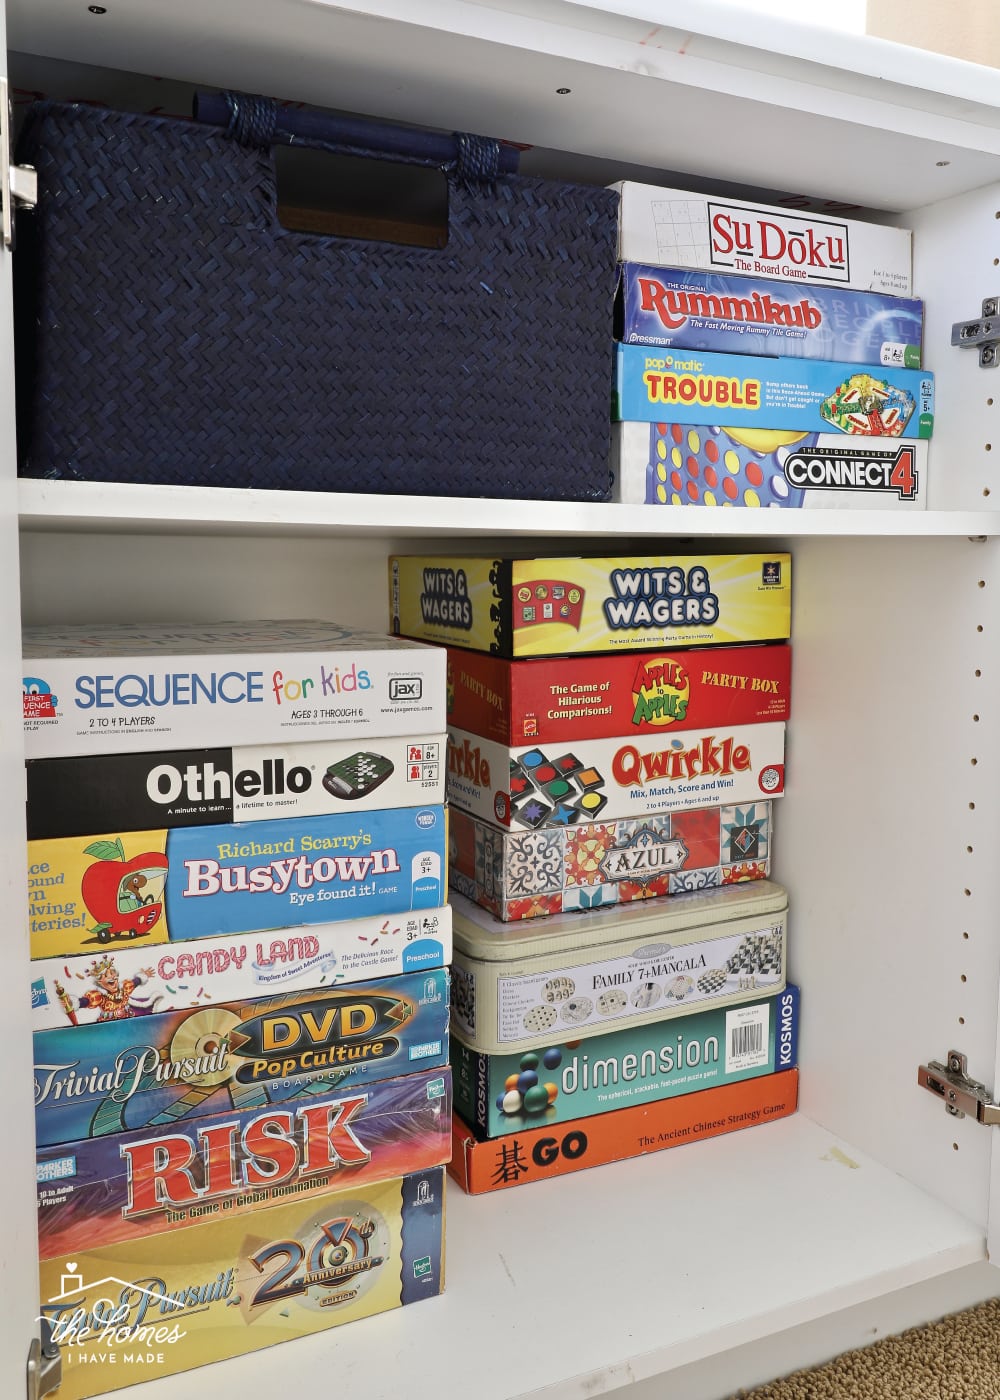 Vertical image of board games stacked inside a cabinet